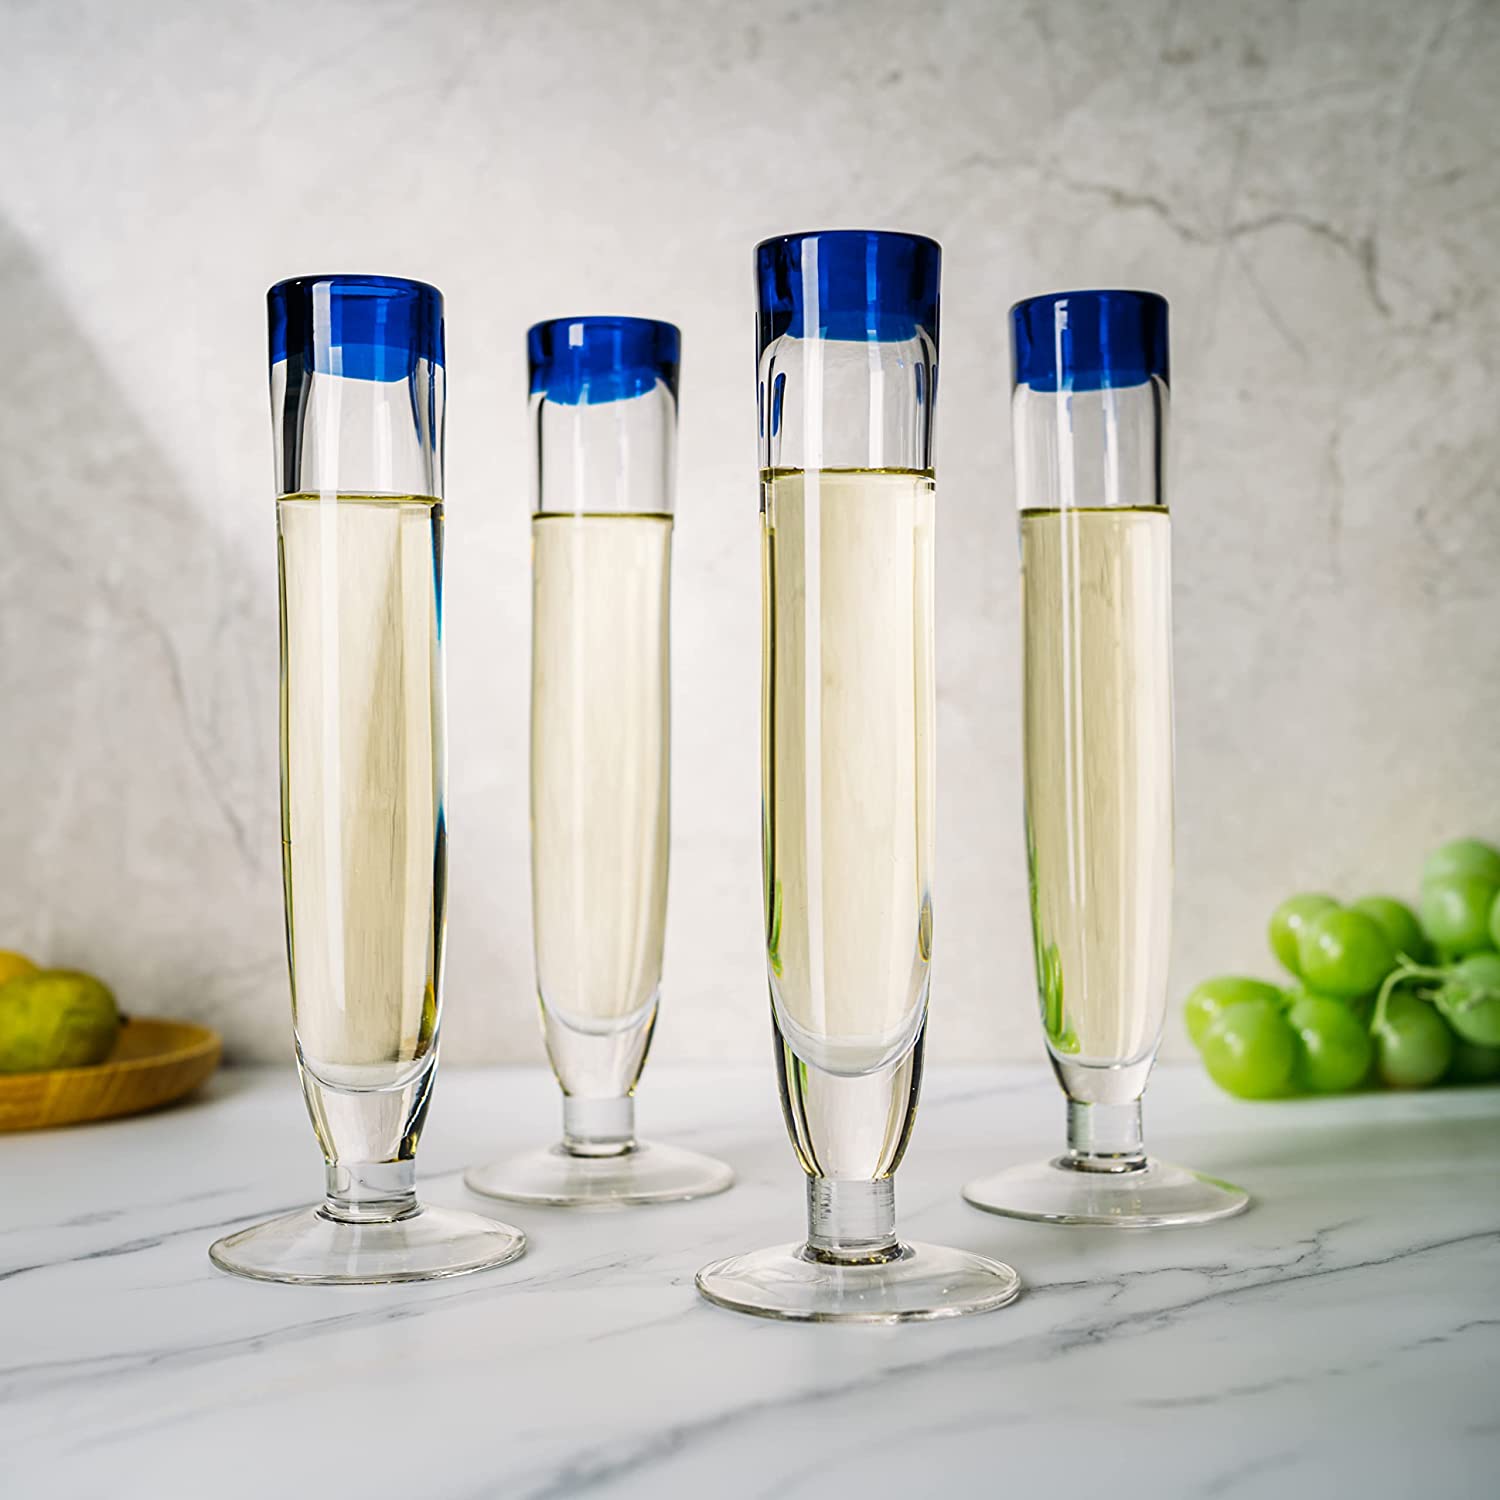 Hand Blown Cobalt Blue Rim Champagne Flutes Set of 4 By The Wine Savant – Luxury Mexican Glassware Thick Champagne, Juice & Cocktail Drinking Glass Flutes For Celebration, Weddings, Anniversary-2